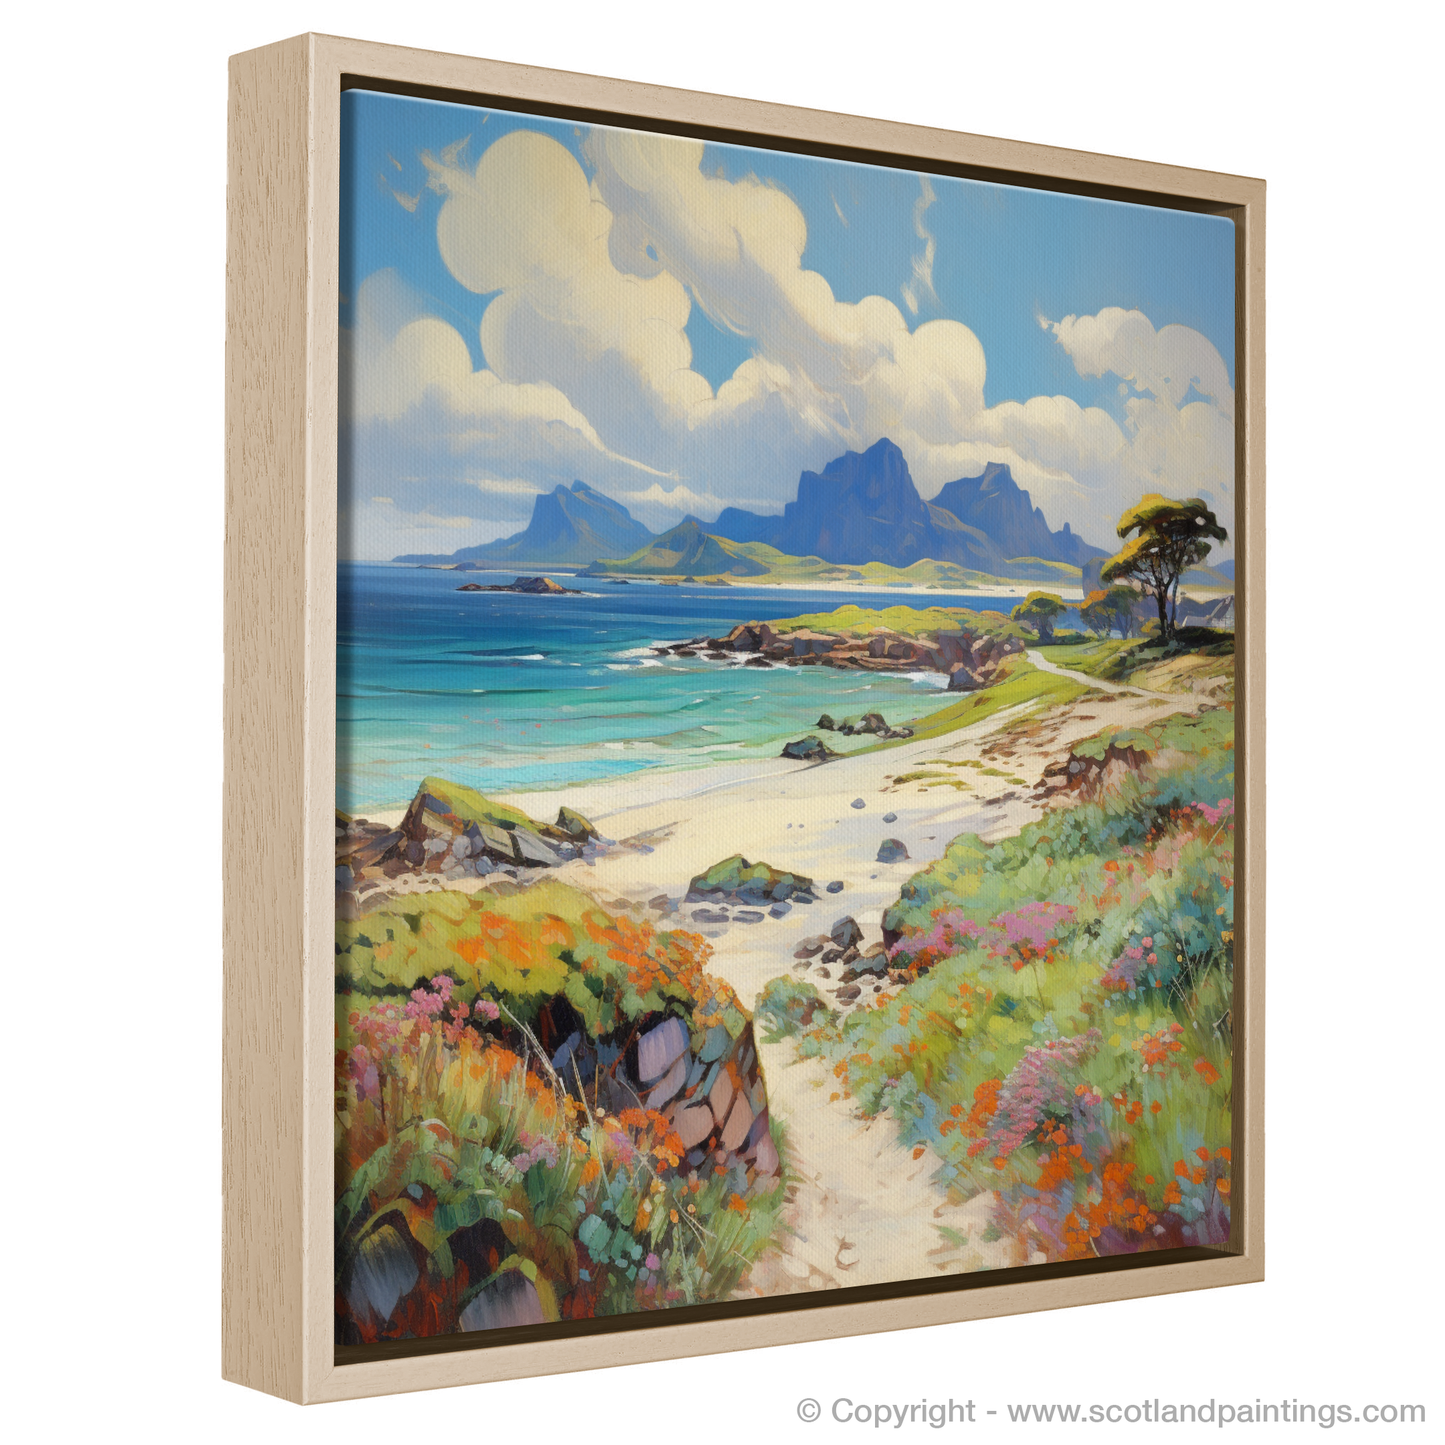 Painting and Art Print of Isle of Eigg, Inner Hebrides in summer entitled "Summer Serenade on the Isle of Eigg".